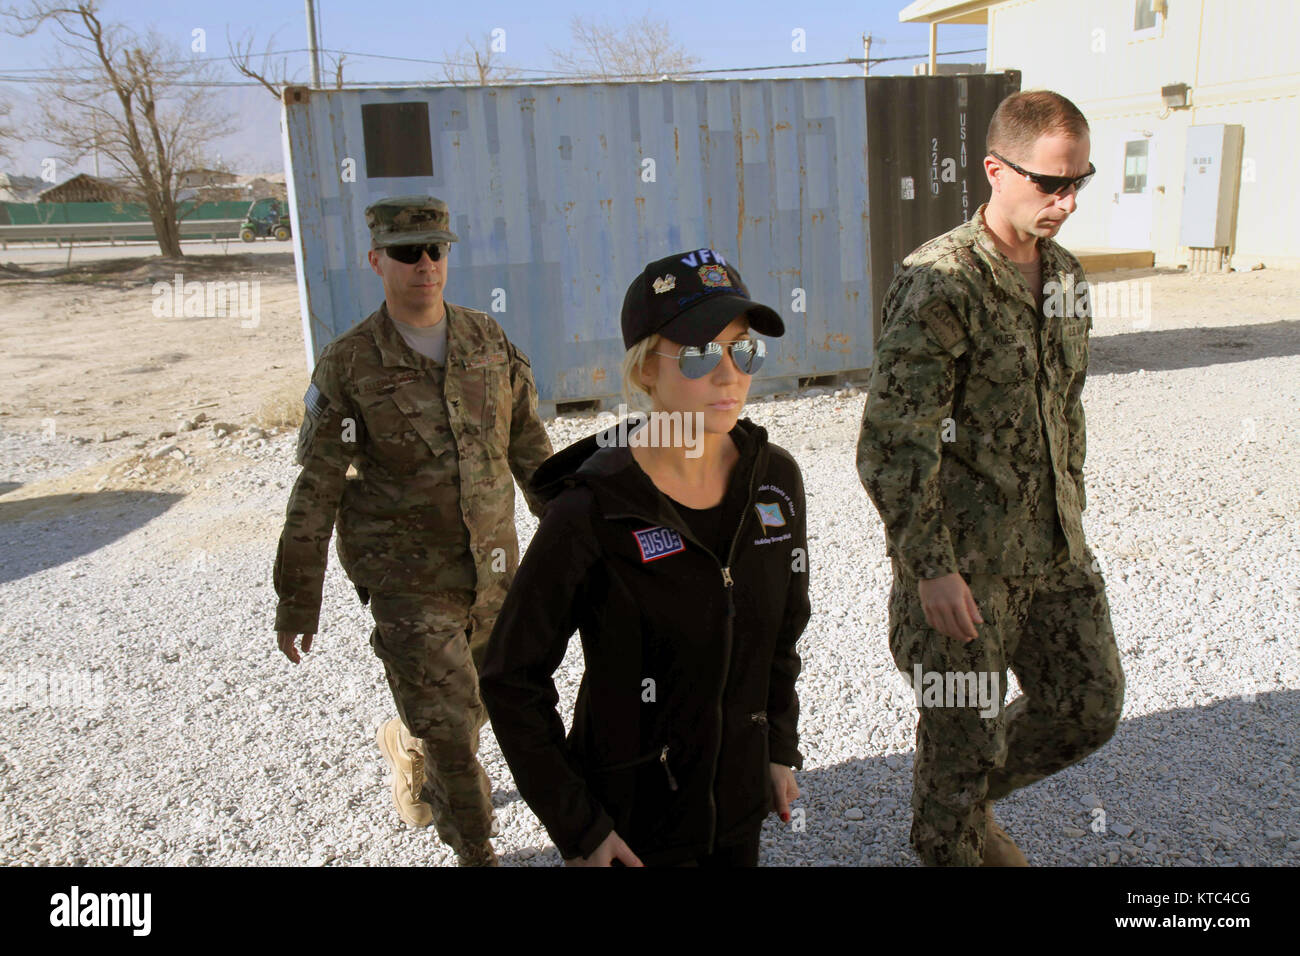 Country music artist Kellie Pickler tours the airbase during the USO Holiday troop visit at Bagram Air Field December 9, 2014 in Bagram, Afghanistan. Stock Photo